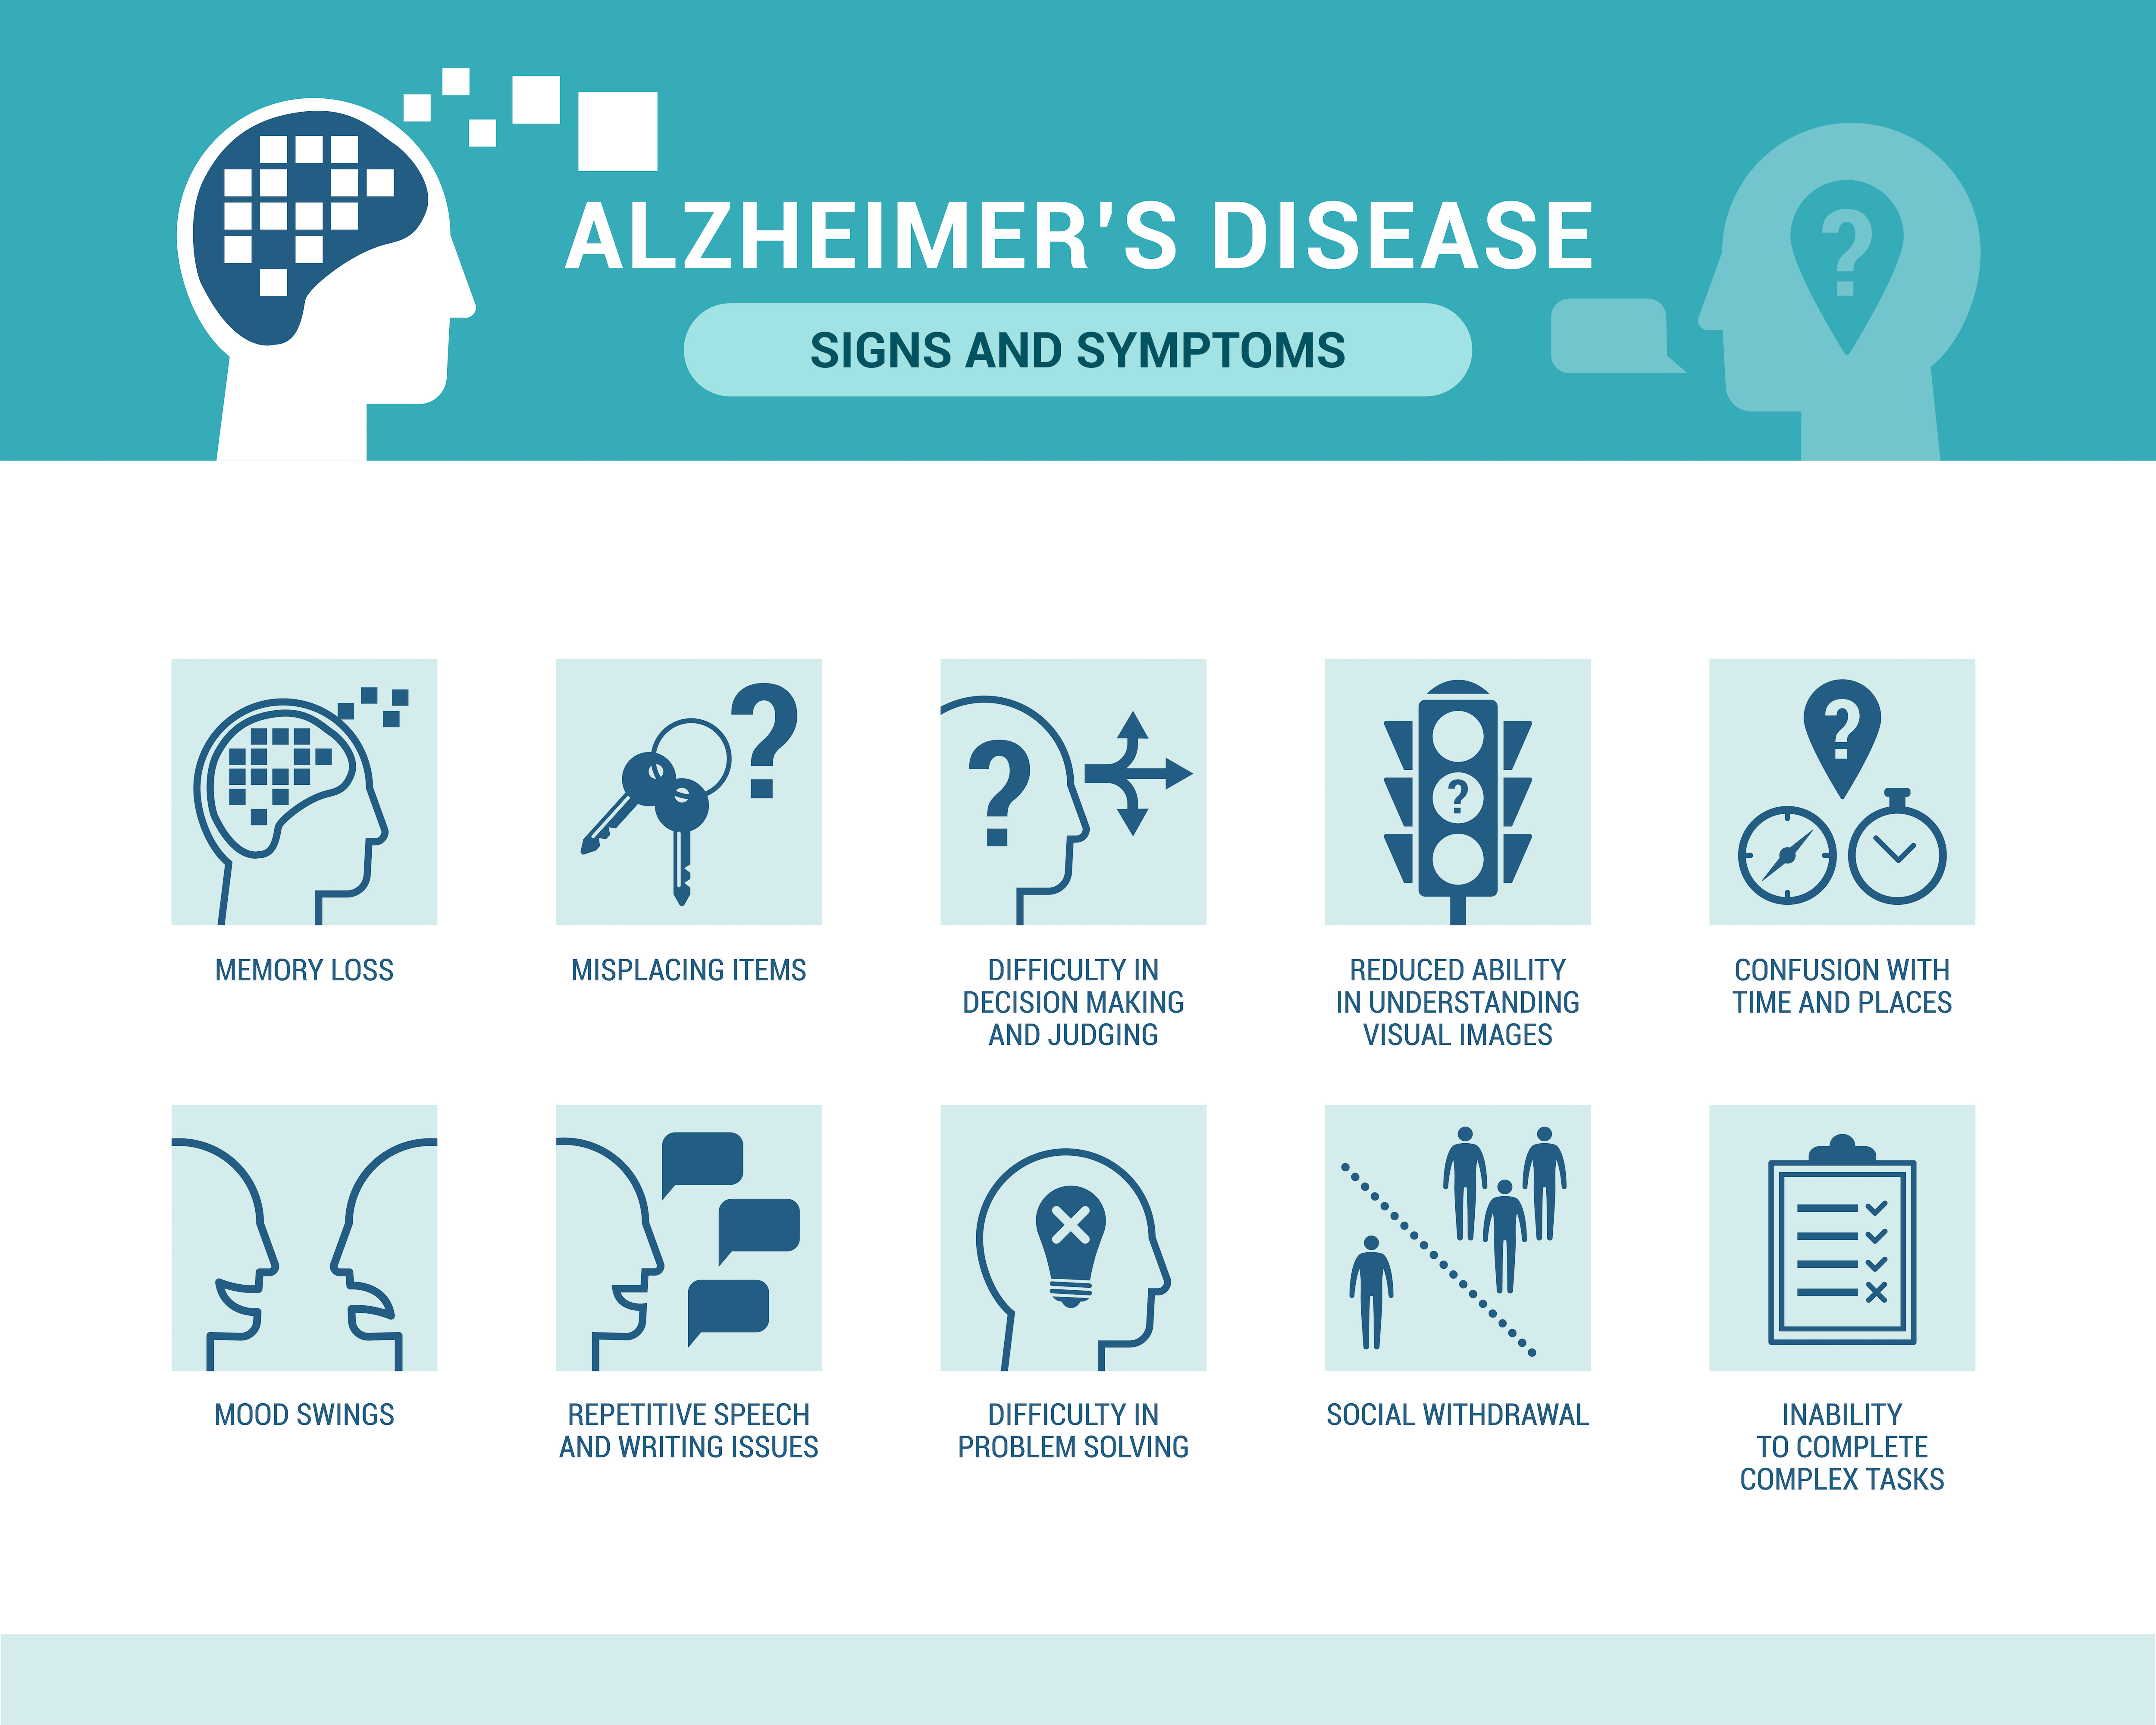 Graphic of Alzheimer's Disease Signs and Symptoms, including memory loss, difficulty in problem solving, and more